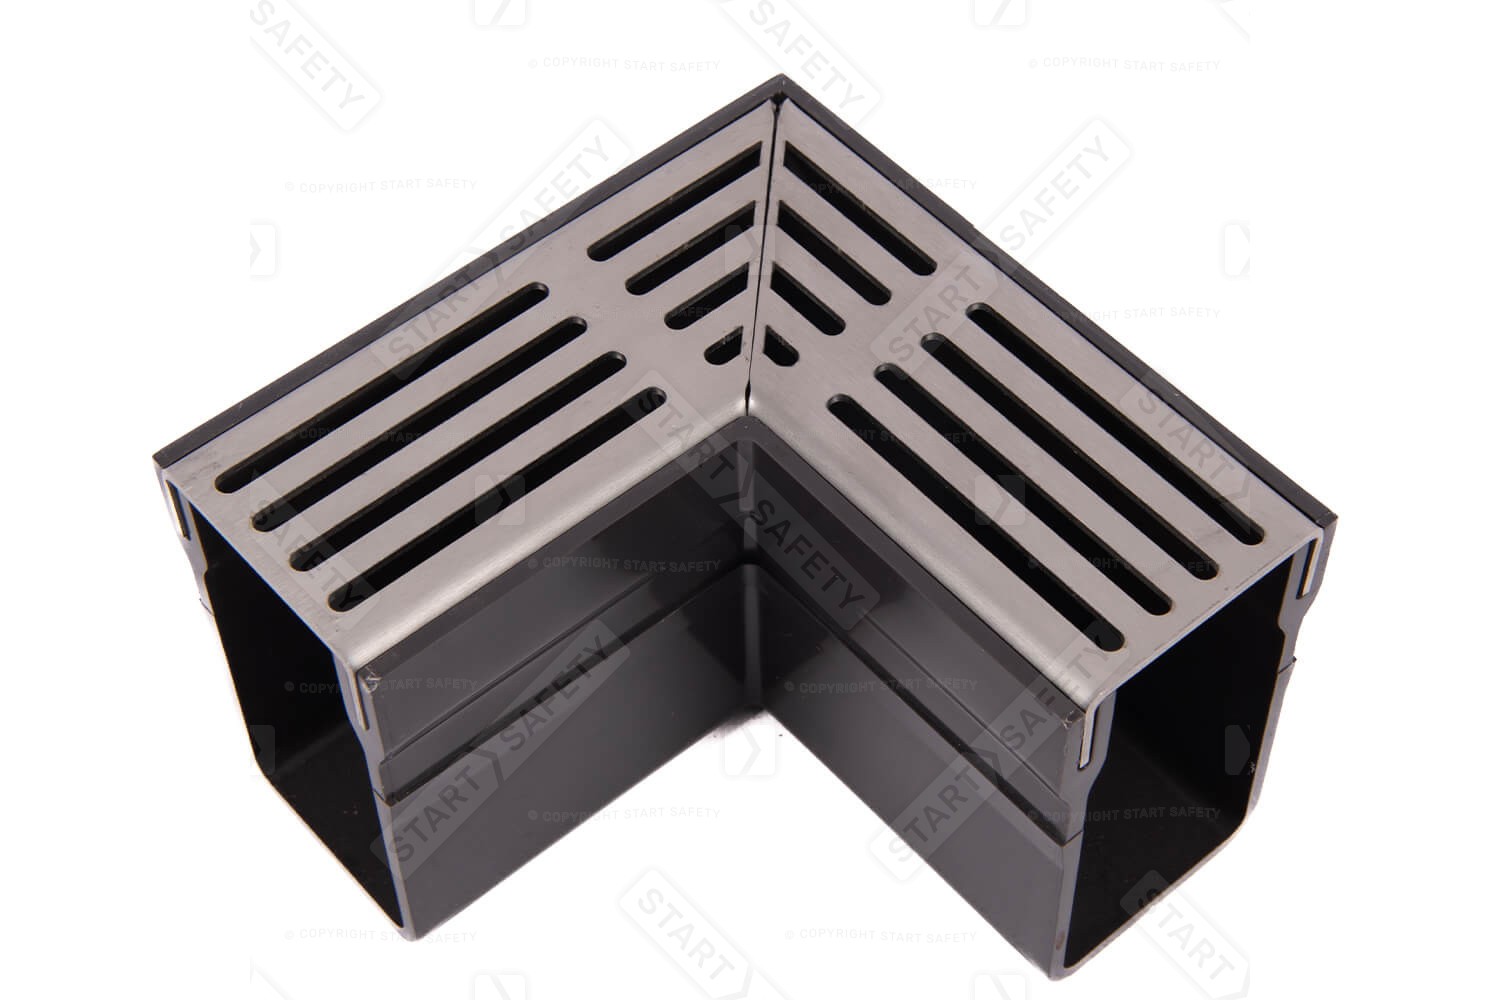 Profile of a Stainless Steel Alusthetic Threshold Drain Corner Piece